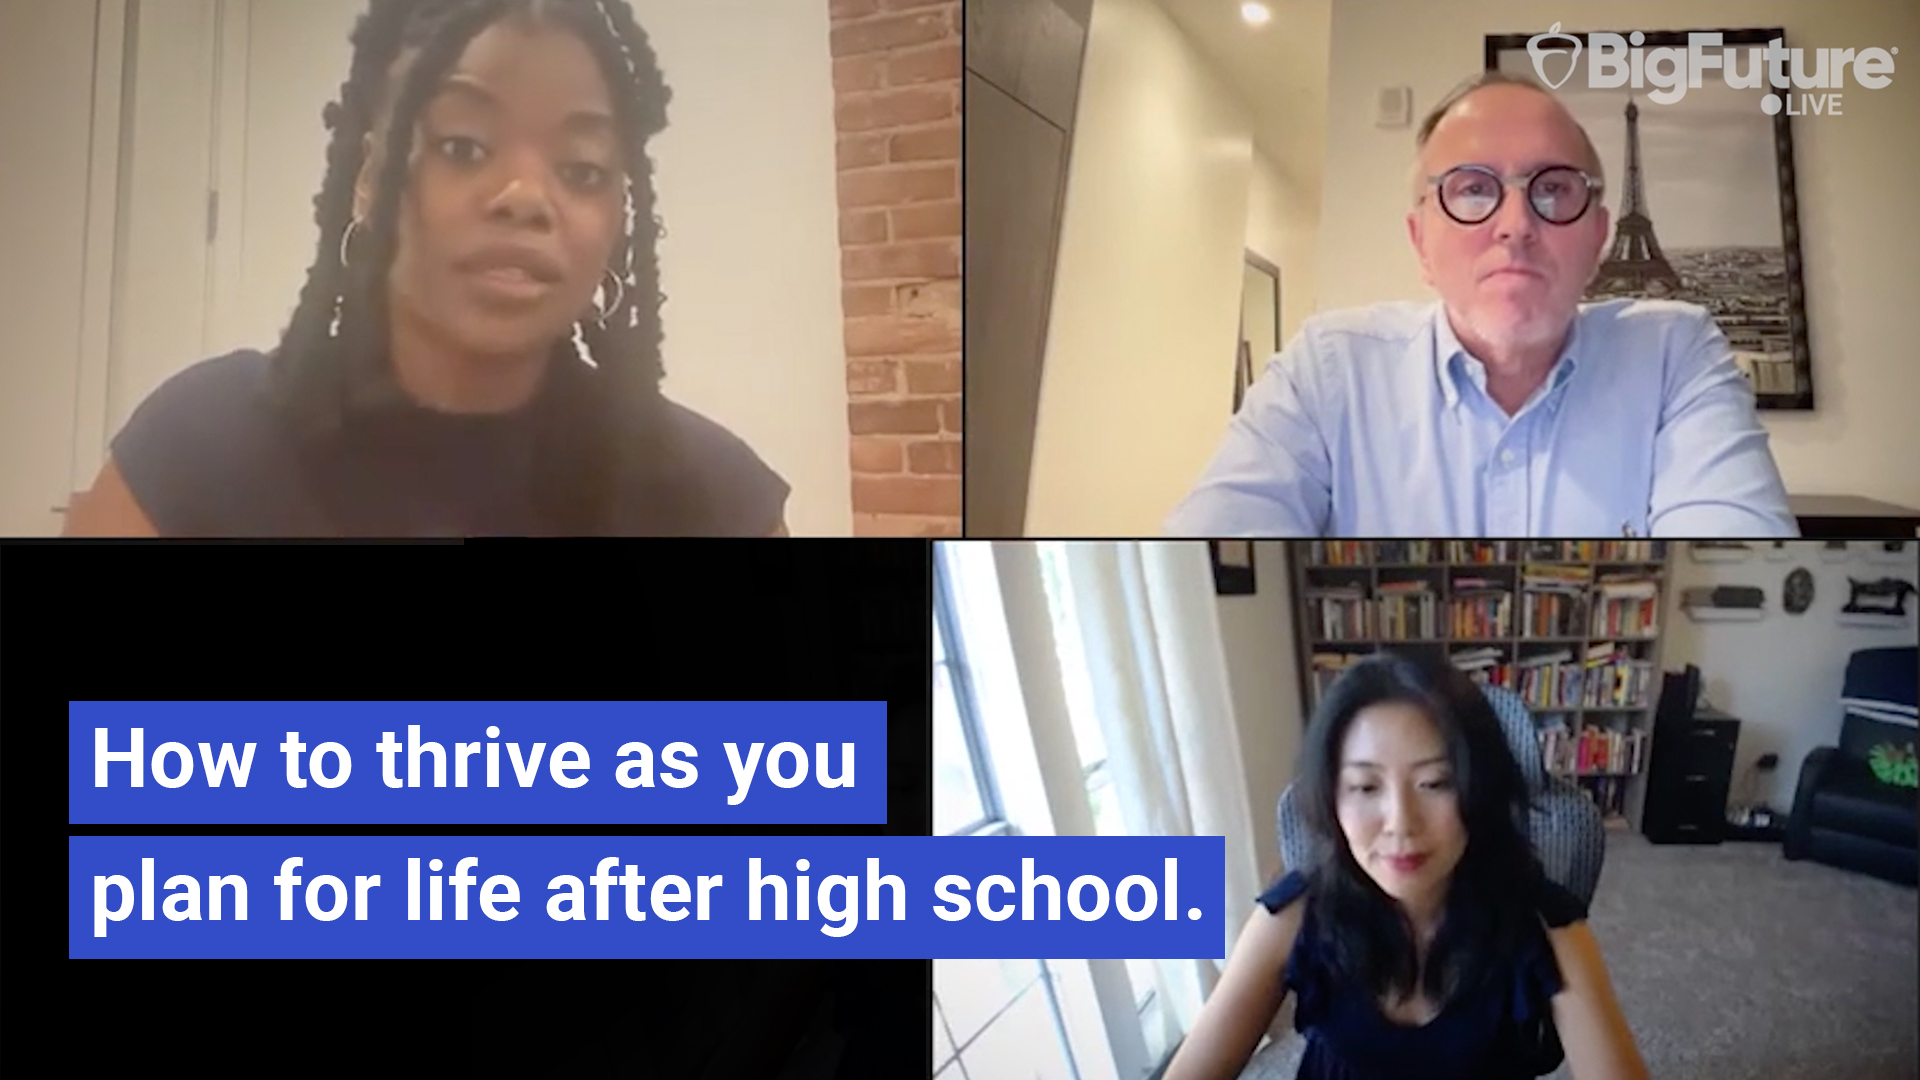 How to thrive as you plan for life after high school